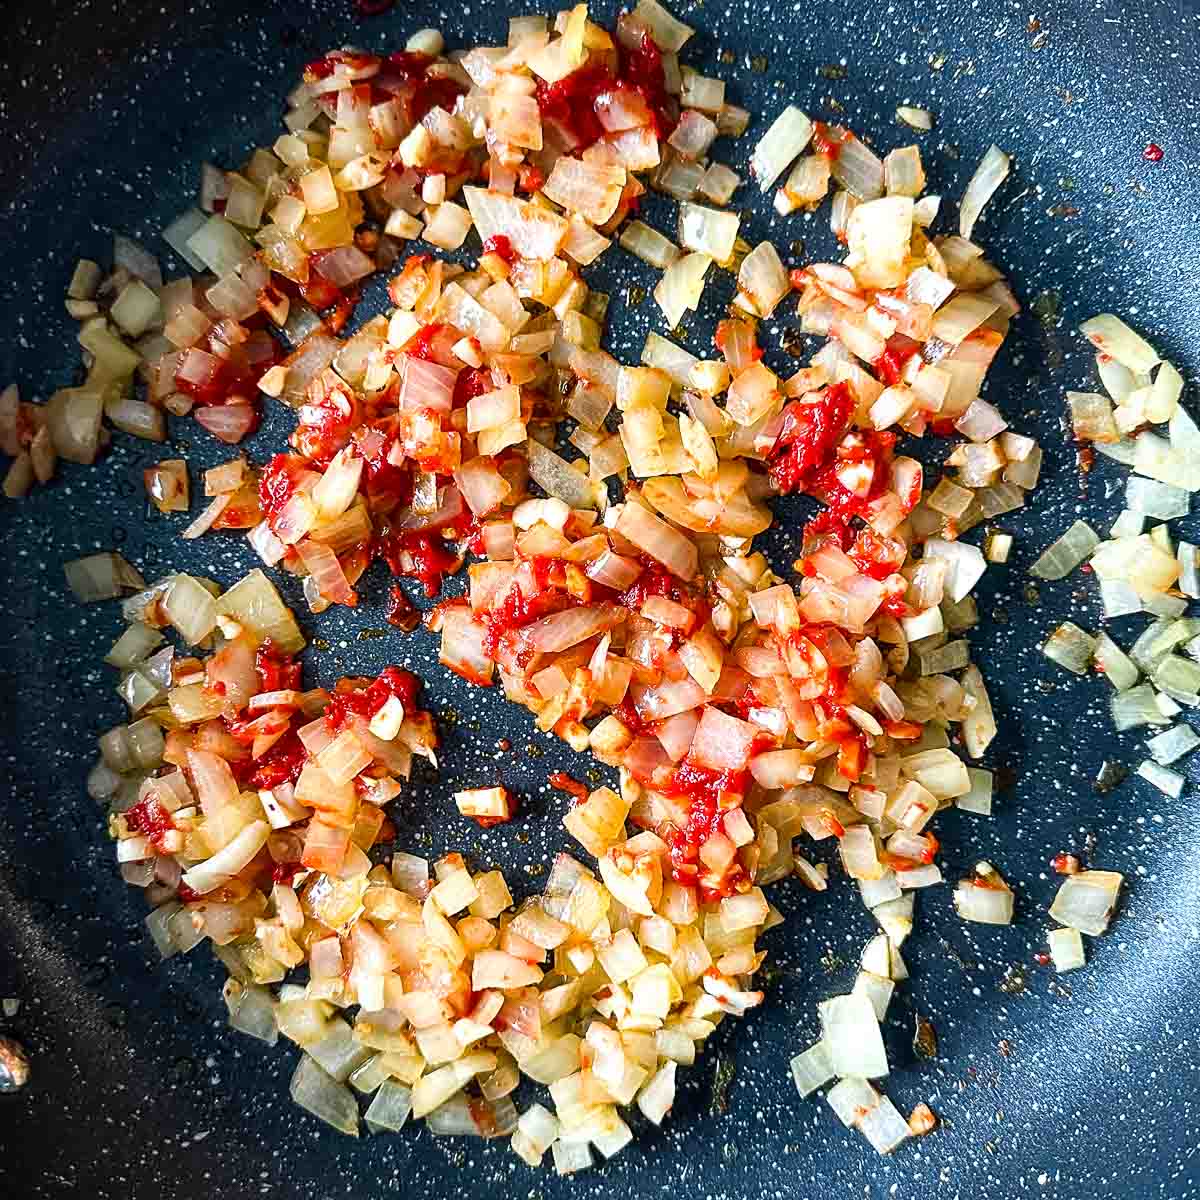 tomato paste is added to the frying pan with sweated onion, garlic, and chili flakes.